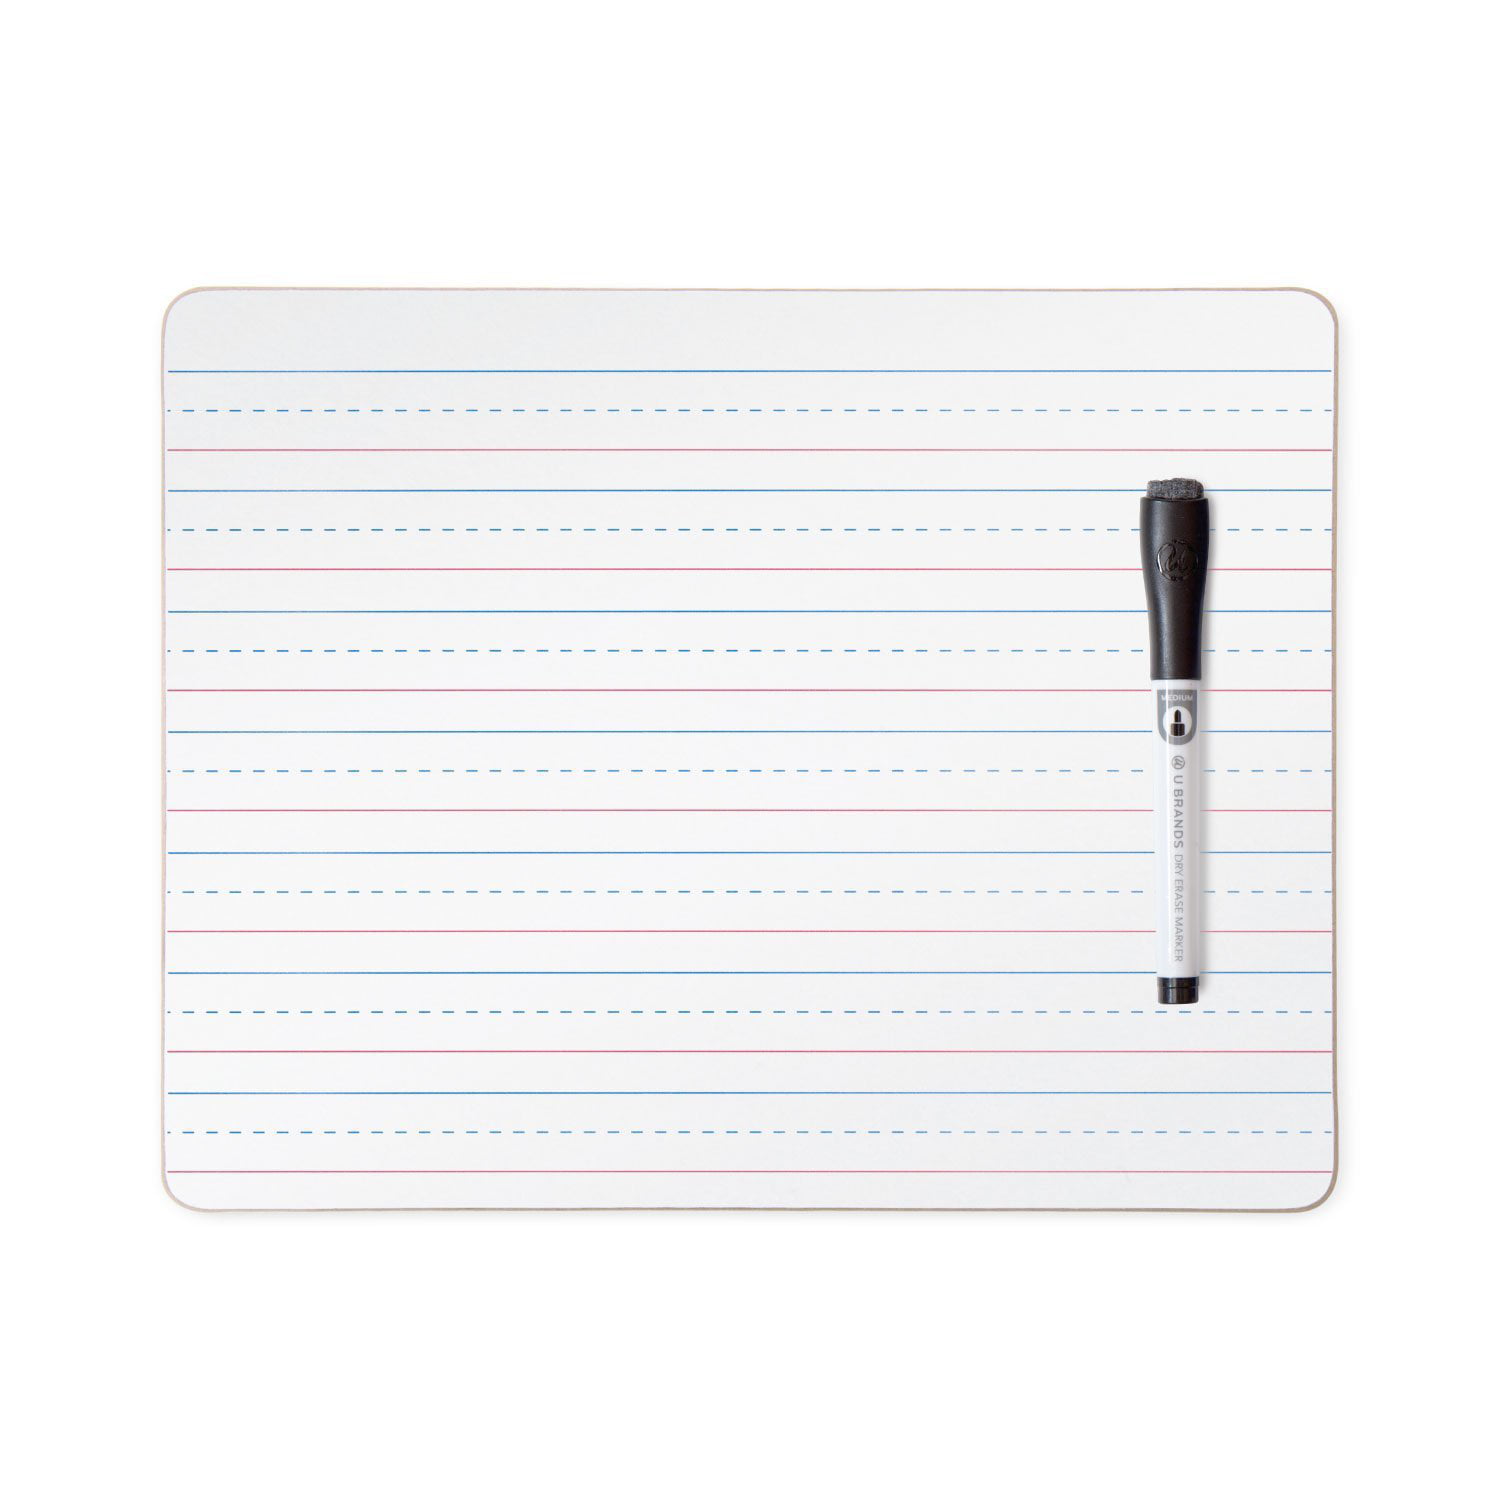 Dry Erase Lapboard Double Sided Mini Lapboards 9x12 inches 